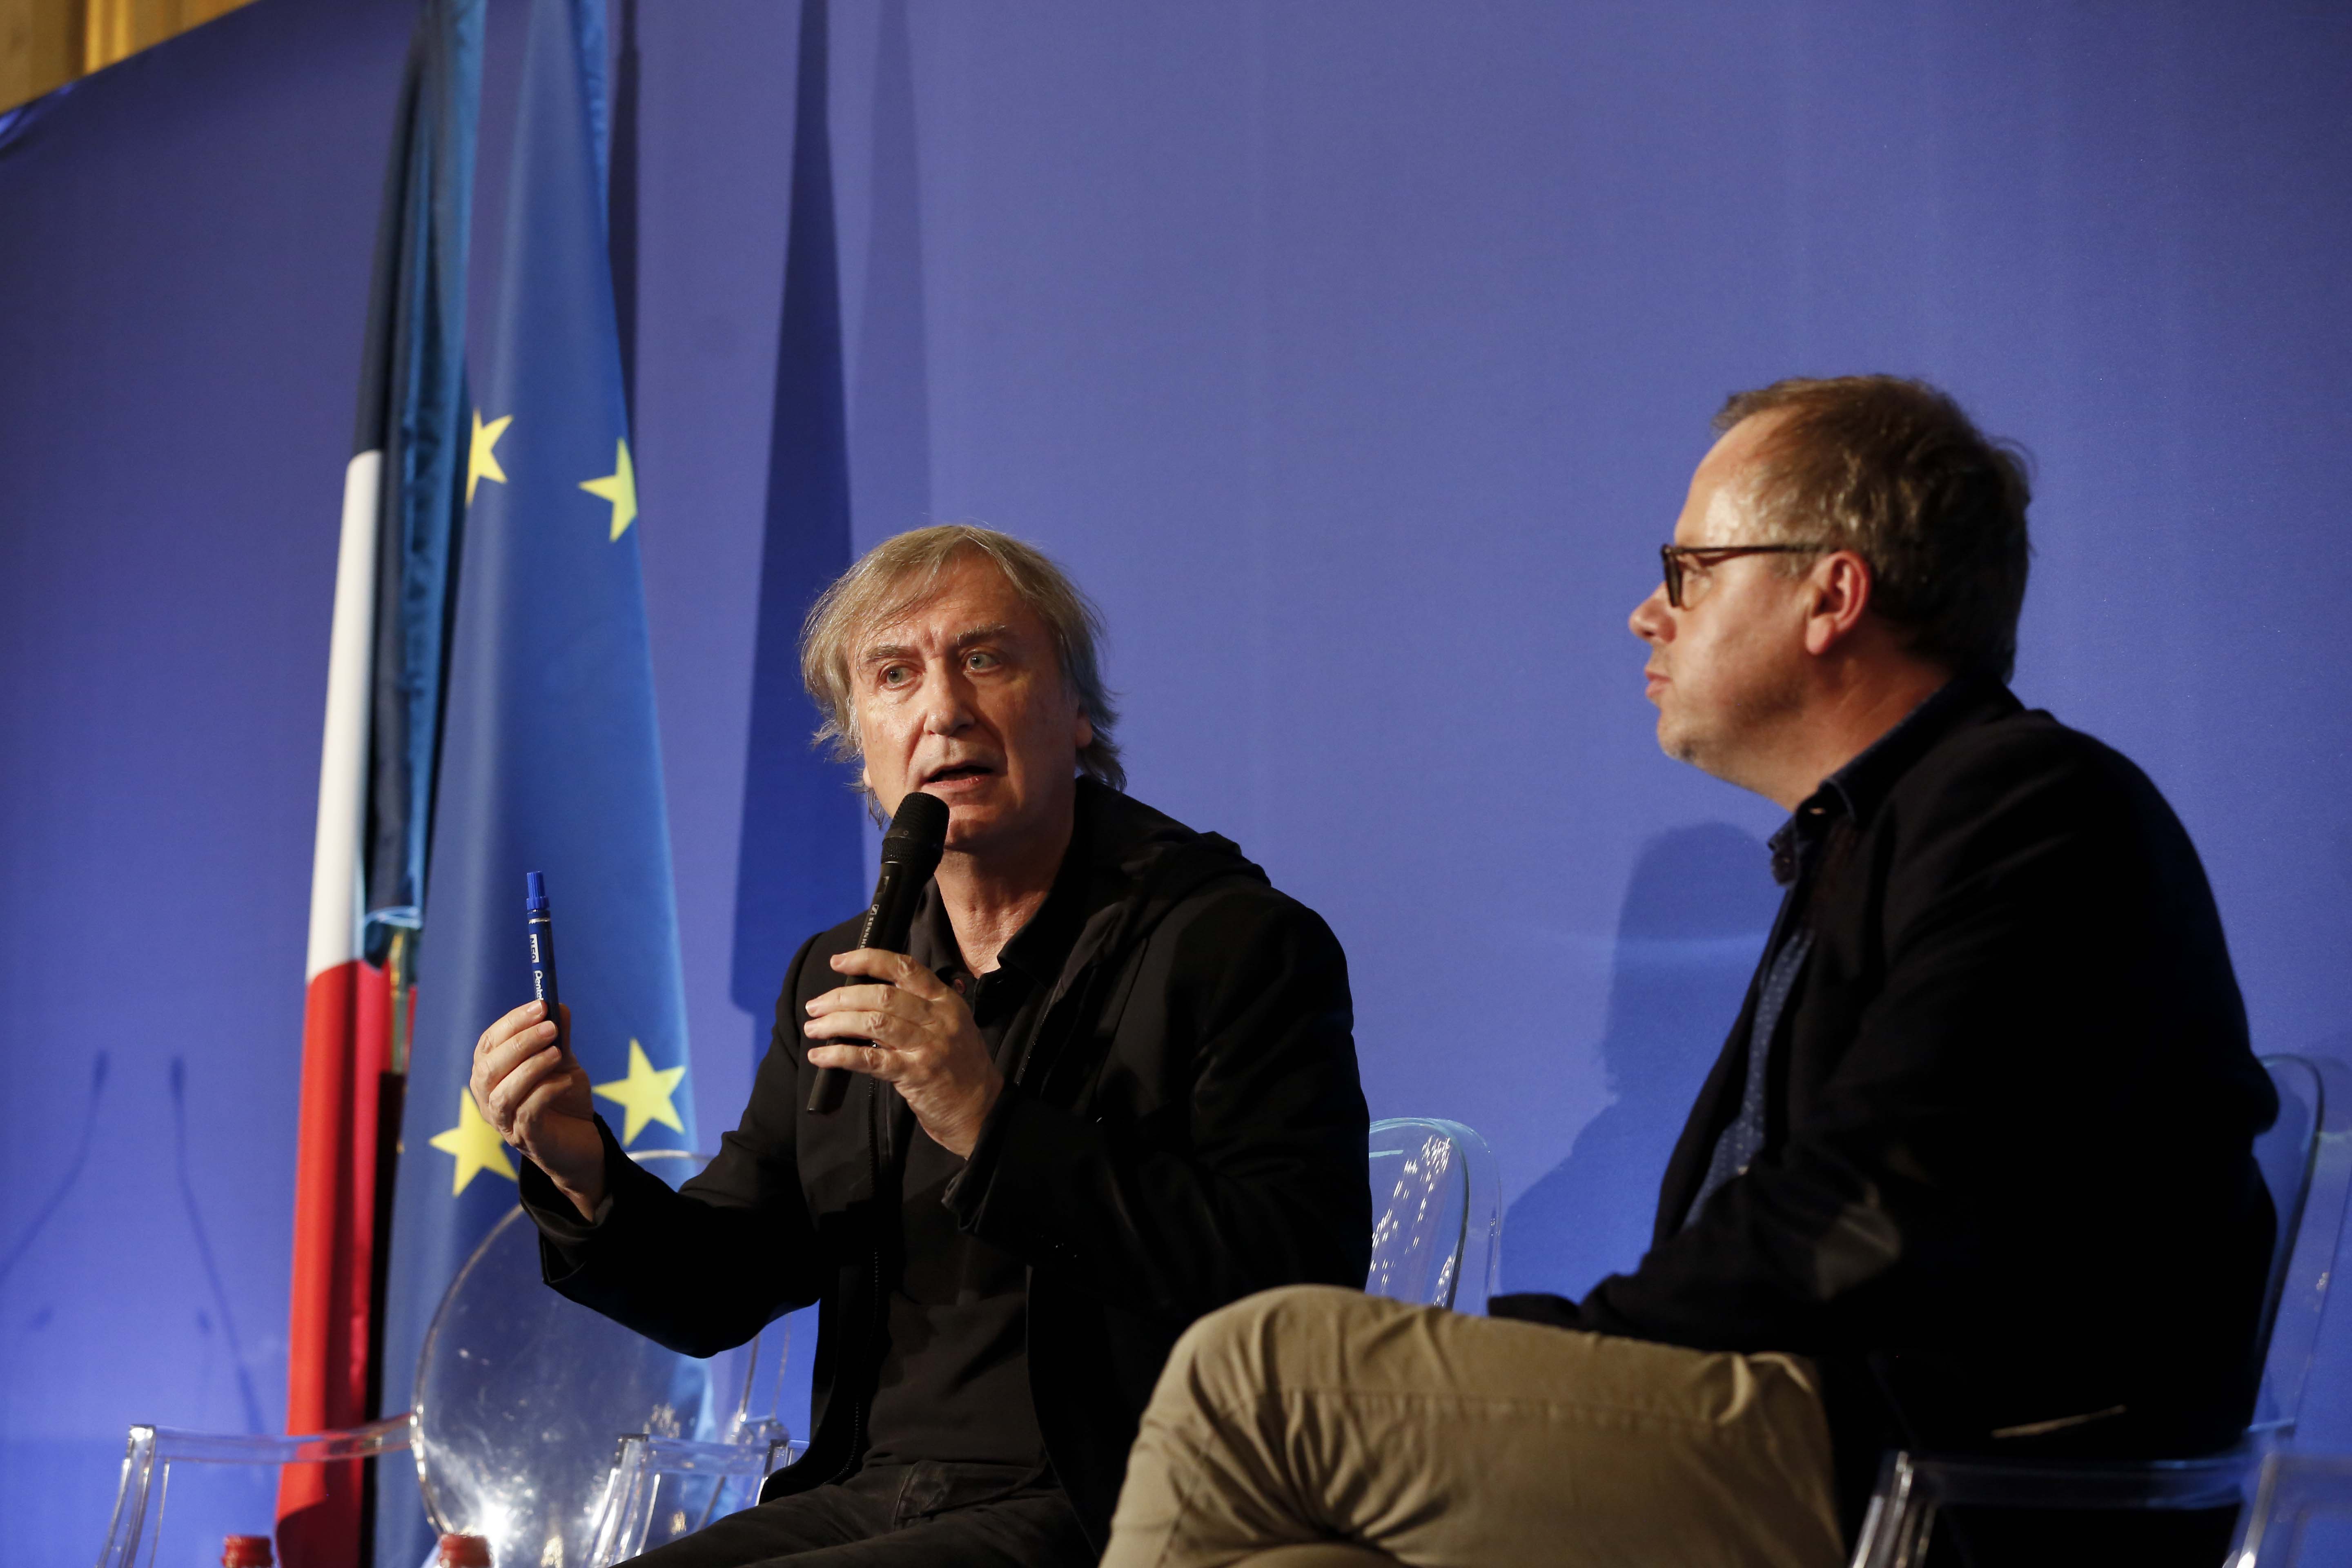 Plantu, president of Cartooning for Peace, in conversation with Christophe Deloire, Reporters without Borders, photo: Judith Litvine